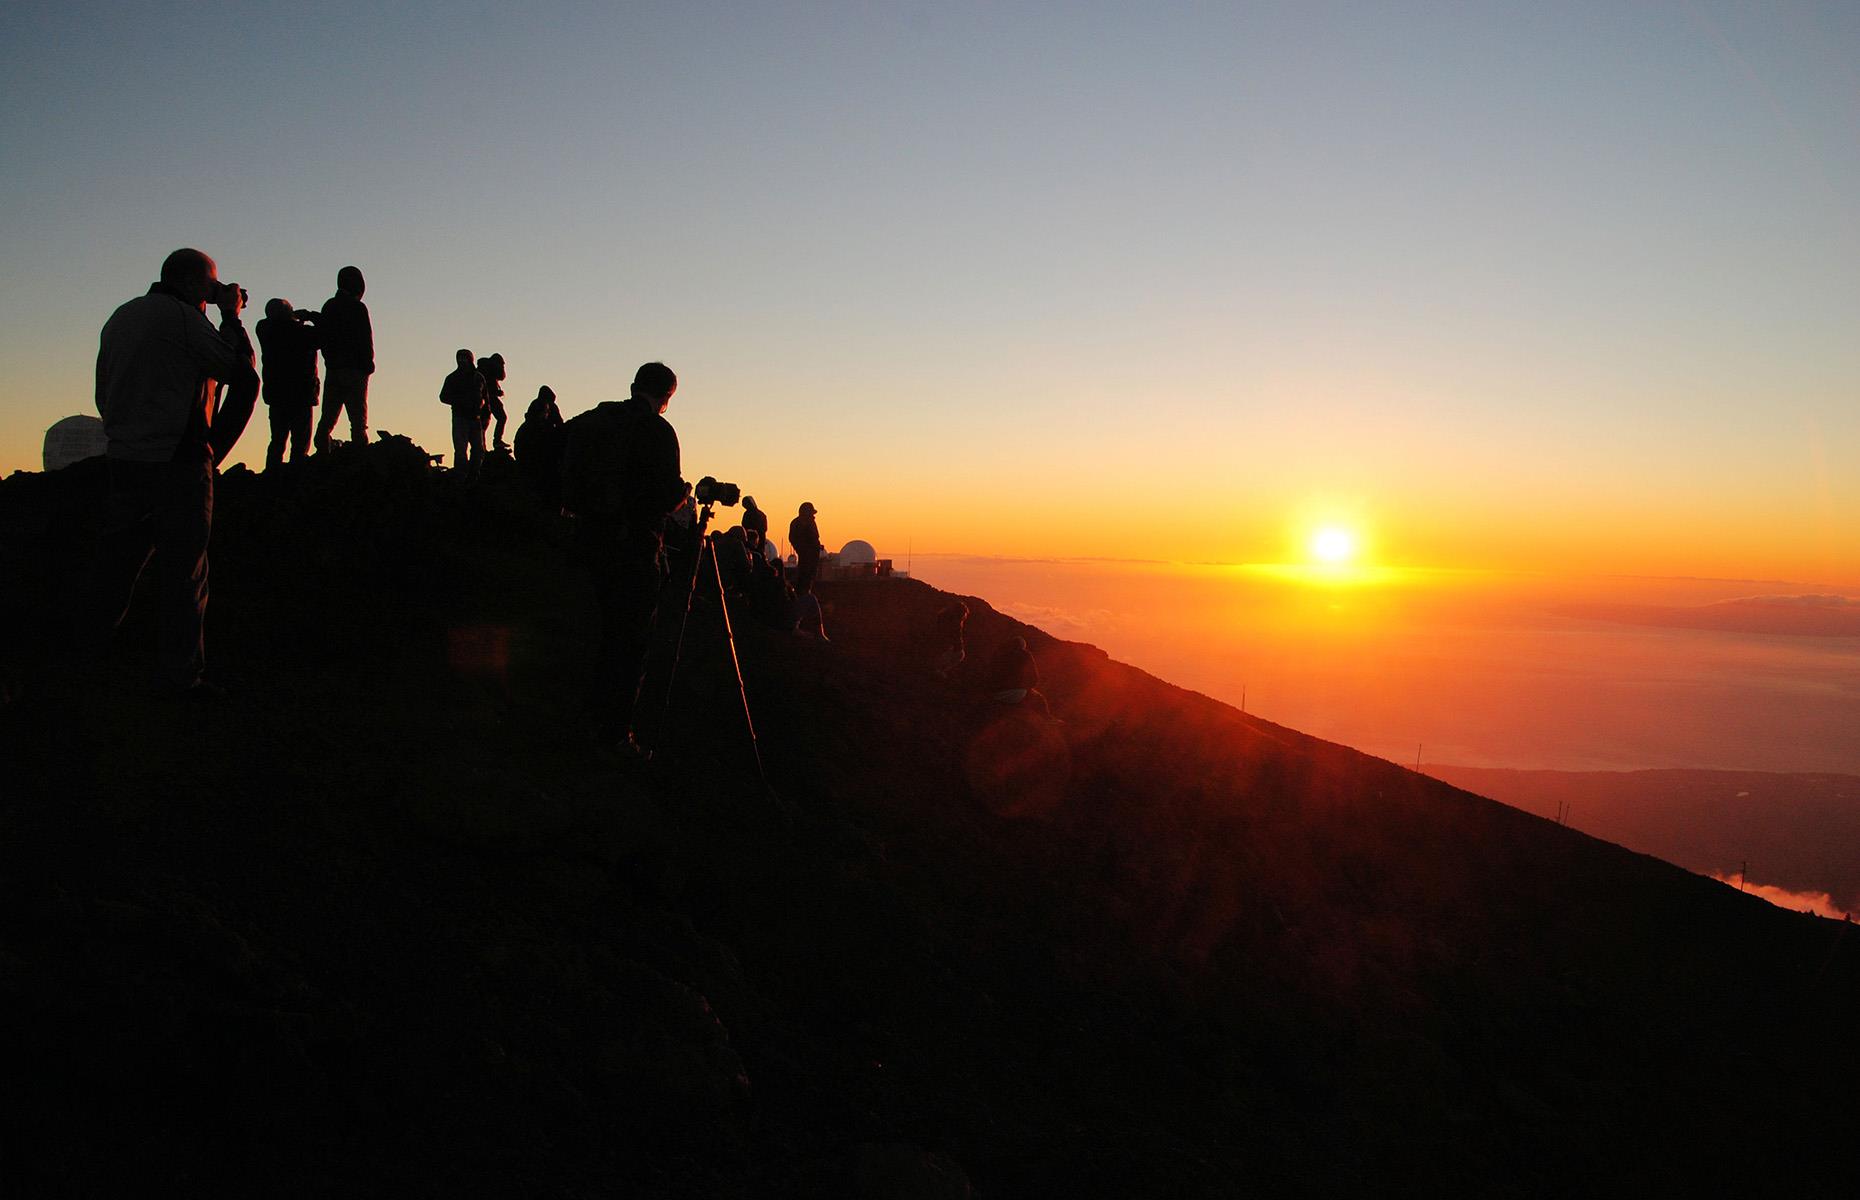 The legend says that he stopped the sun in its tracks across the sky from the top of Mount Haleakalā, and would only let it go when it promised to slow down and give more light to the island. Haleakalā translates as "House of the Sun", and to this day tourists flock to its landscape at dawn to capture the sun in their own way: with their cameras.